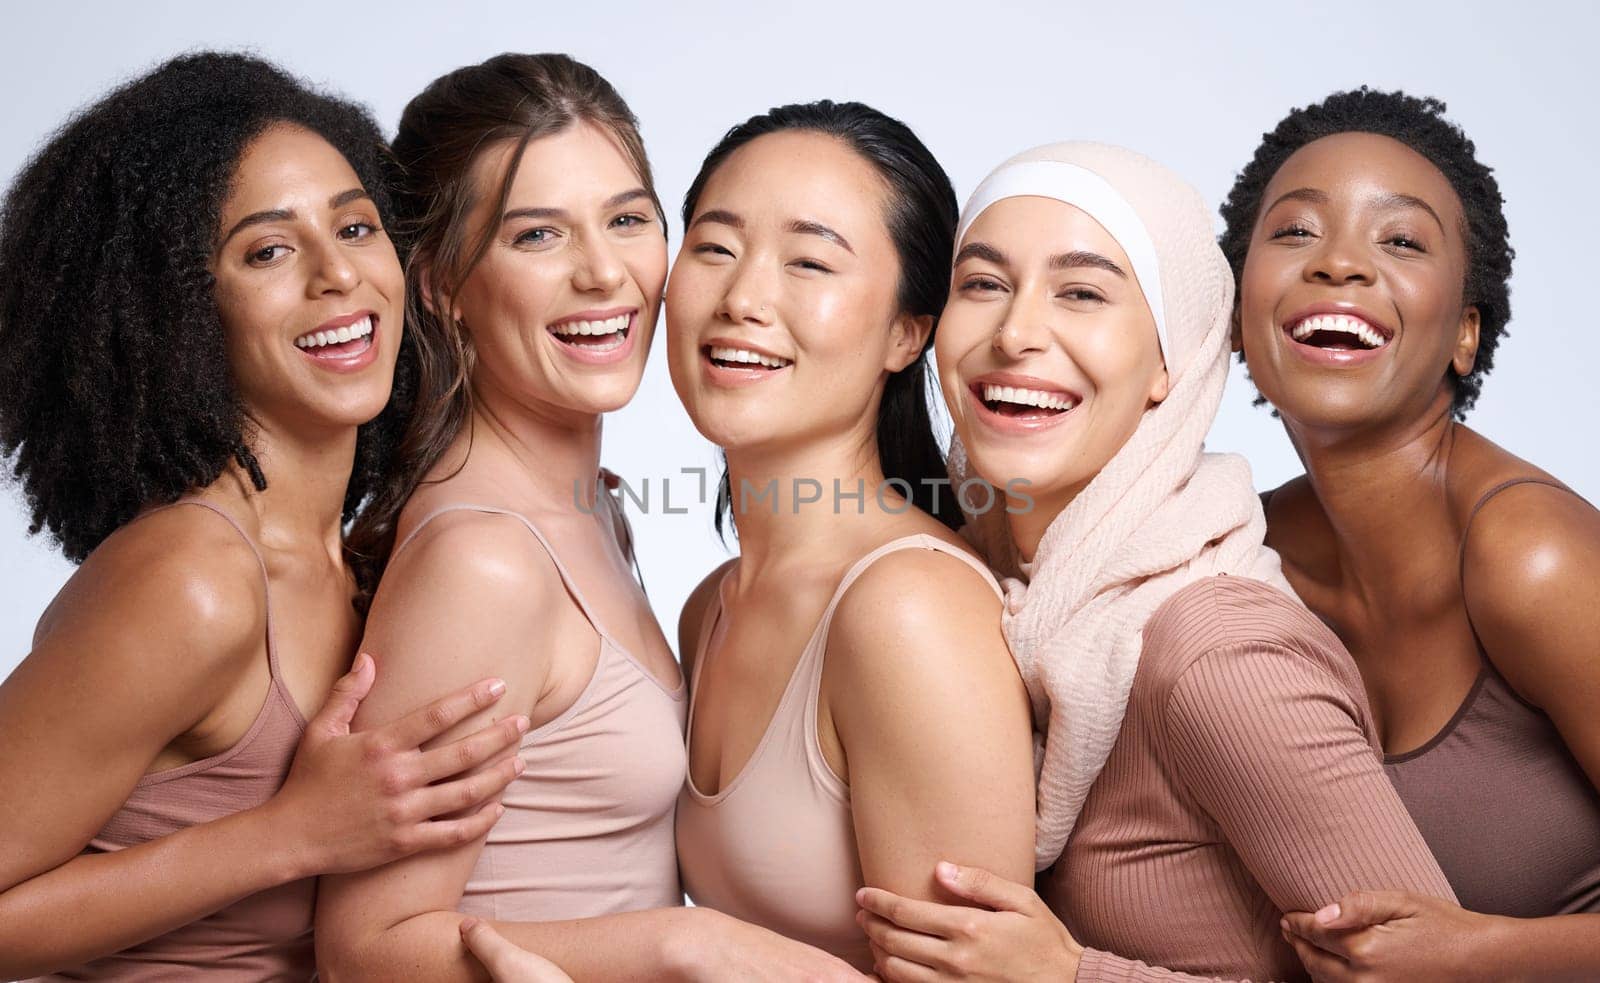 Portrait, beauty and diversity with woman friends in studio on a gray background together for inclusion. Happy, smile and solidarity with a model female group posing to promote real equality by YuriArcurs